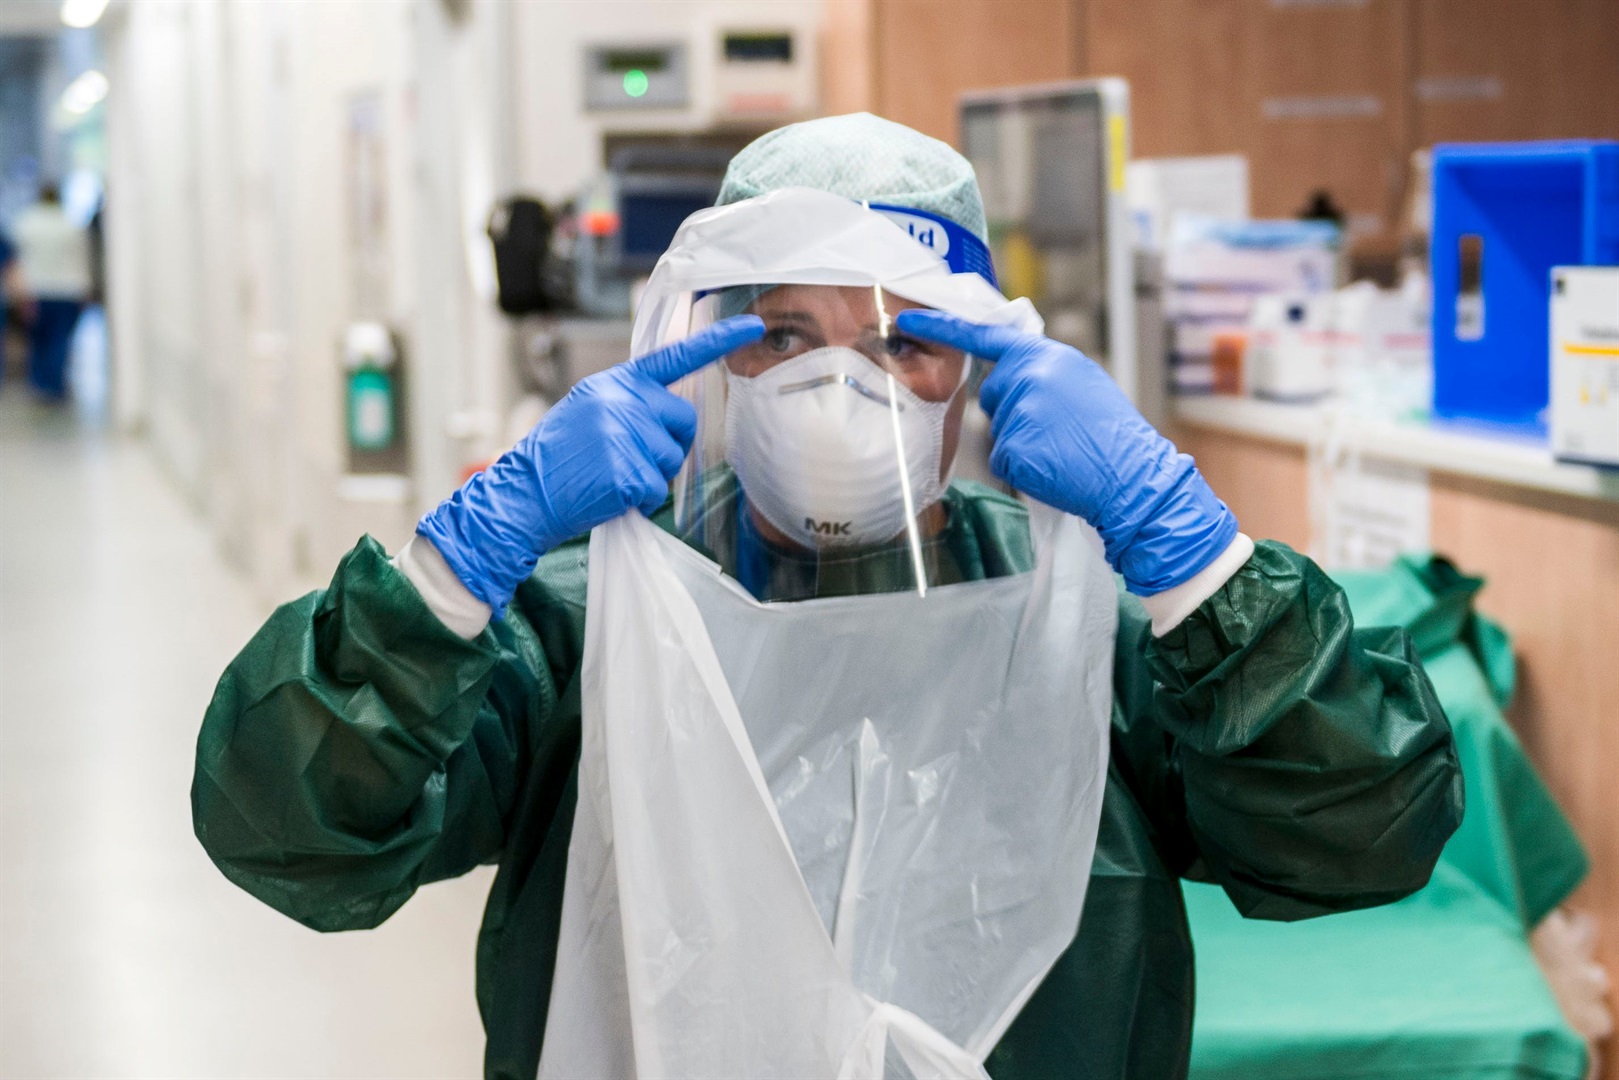 A nurse puts on PPE before tending to a Covid-19 patient.